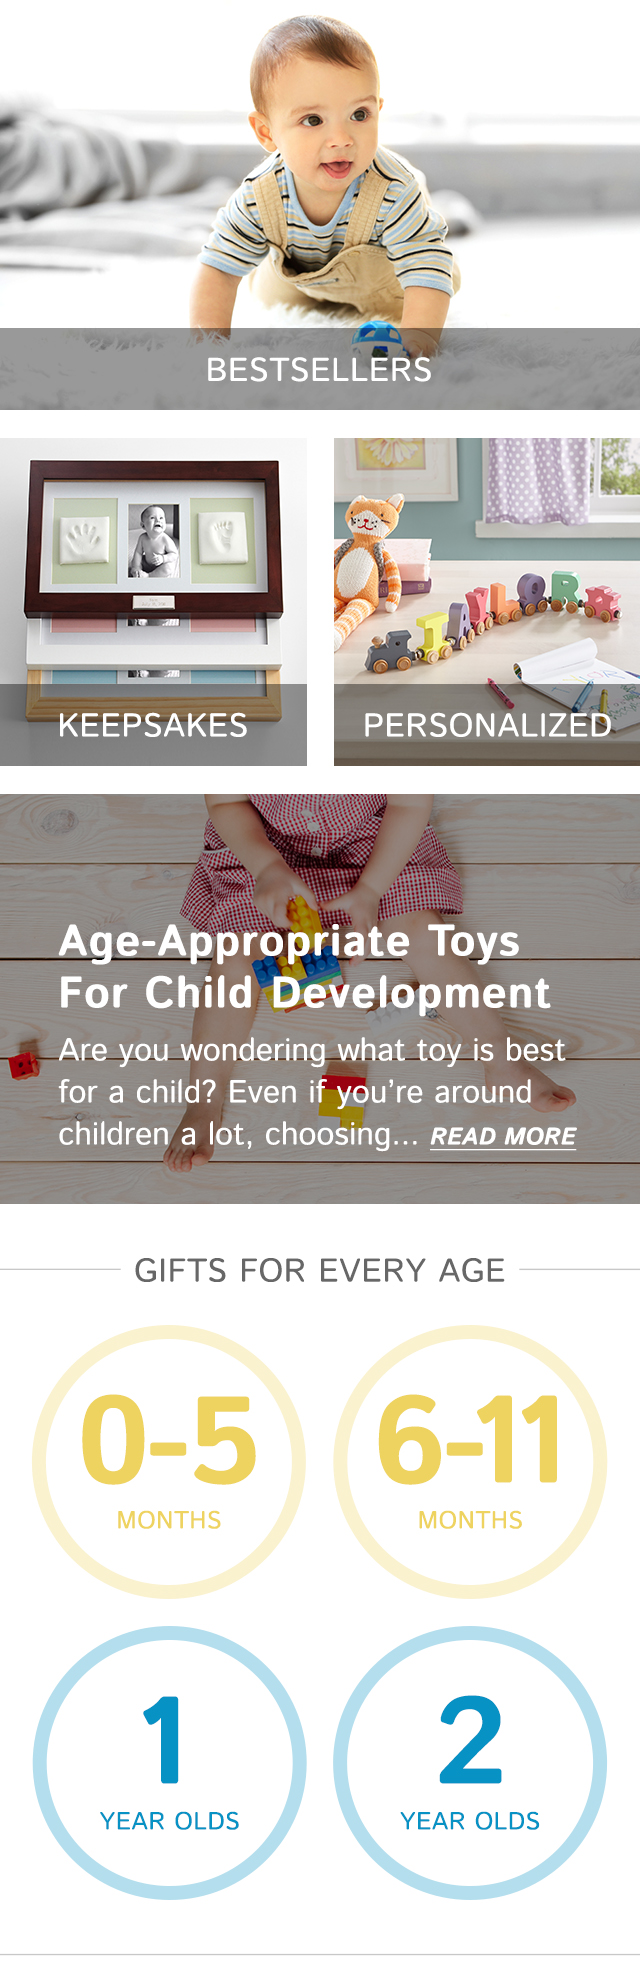 keepsake gifts for 1 year old baby girl